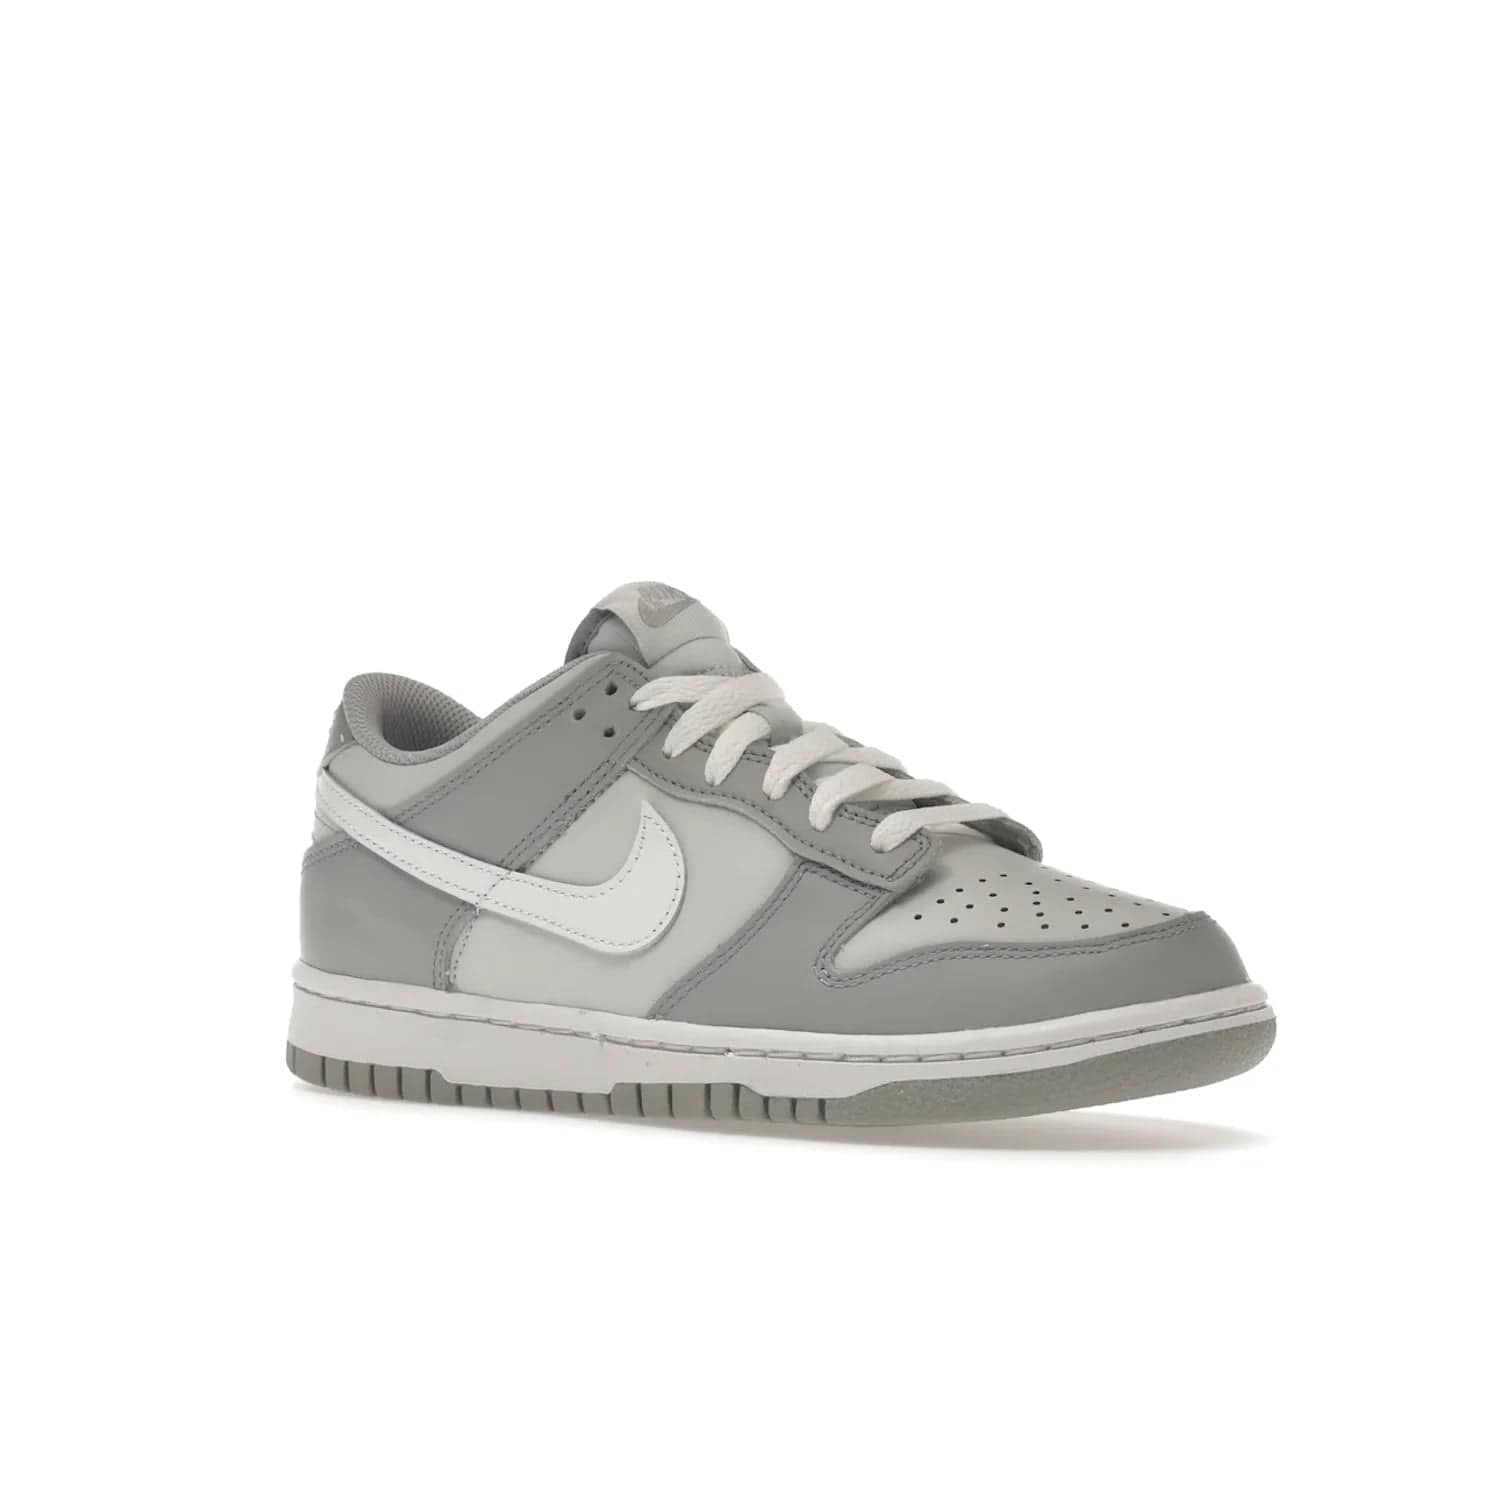 Nike Dunk Low Two-Toned Grey (GS) - Image 5 - Only at www.BallersClubKickz.com - Stylish Nike Dunk Low GS Two-Toned Grey featuring leather build, light/dark grey shades, white Swoosh logo & gray rubber outsole. Get ready to make a statement with this timeless classic released in March 2022.